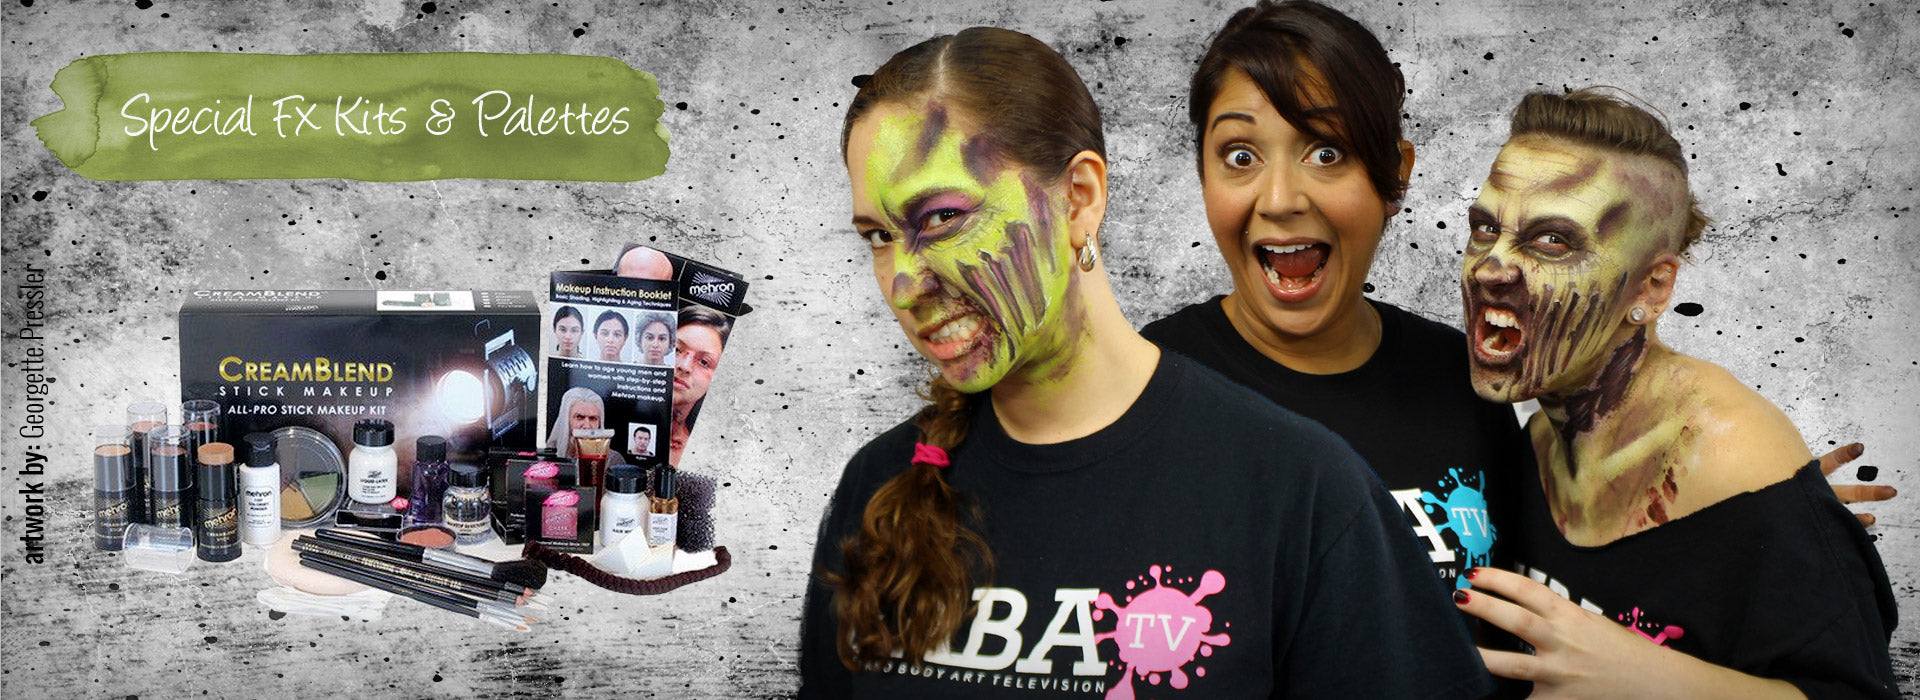 Ben Nye Student Stage Makeup Kit Review - Onstage Faces